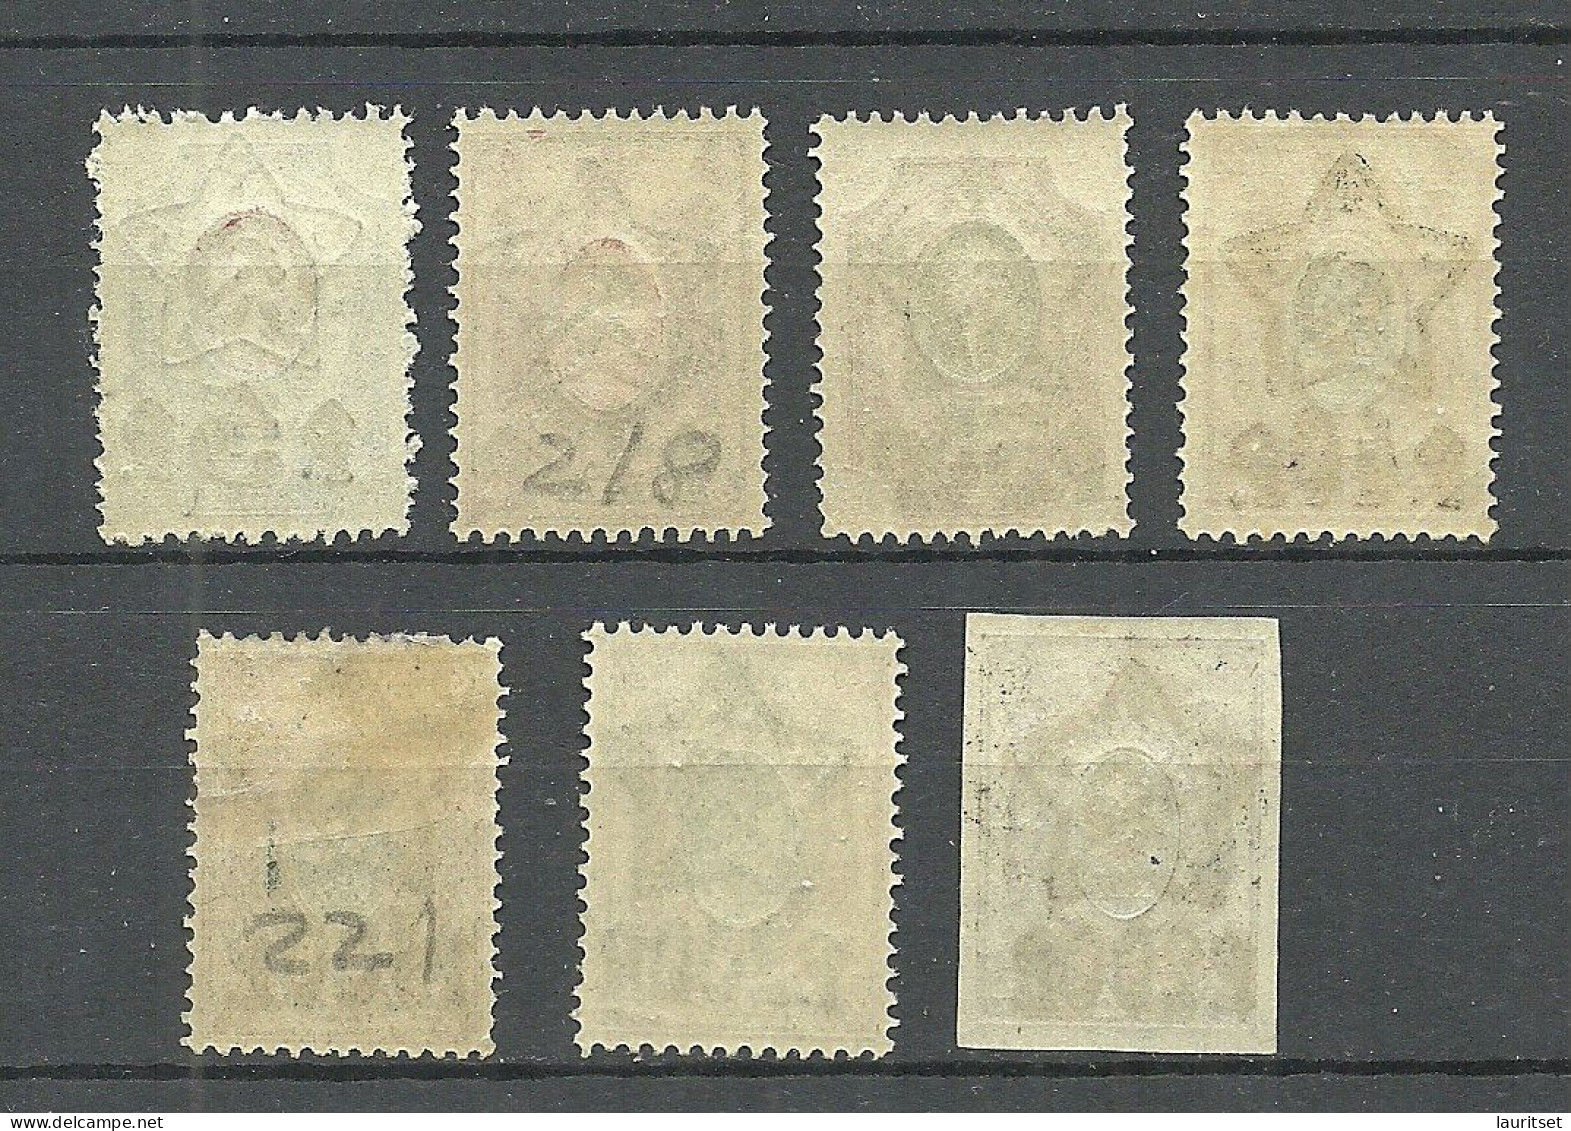 RUSSLAND RUSSIA 1922/1923 = Lot Of 7 Stamps From Set Michel 201 - 207 MNH/MH (100 P. OPT Is MH/*, All Others Are MNH) - Ungebraucht